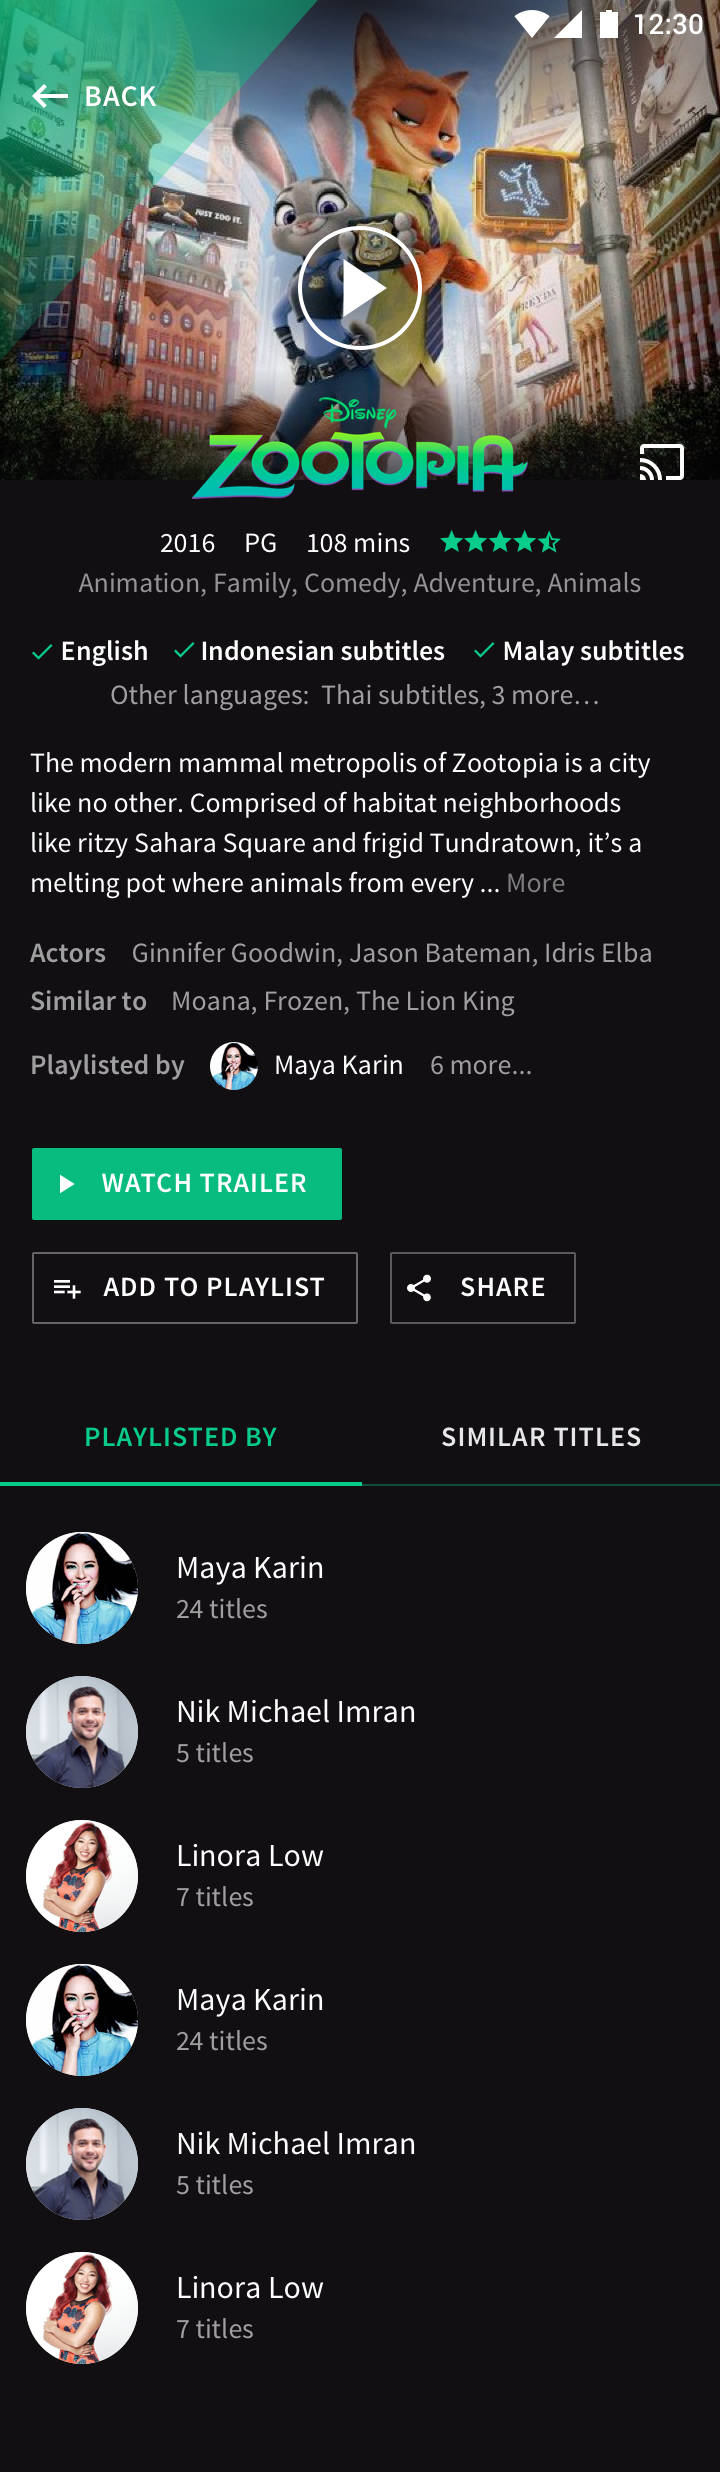 A concept design for the iflix mobile app. Zootopia is the selected title, with a banner and 'play' button prominent, and information about the title displayed below (year, rating, running time, languages, description, etc).